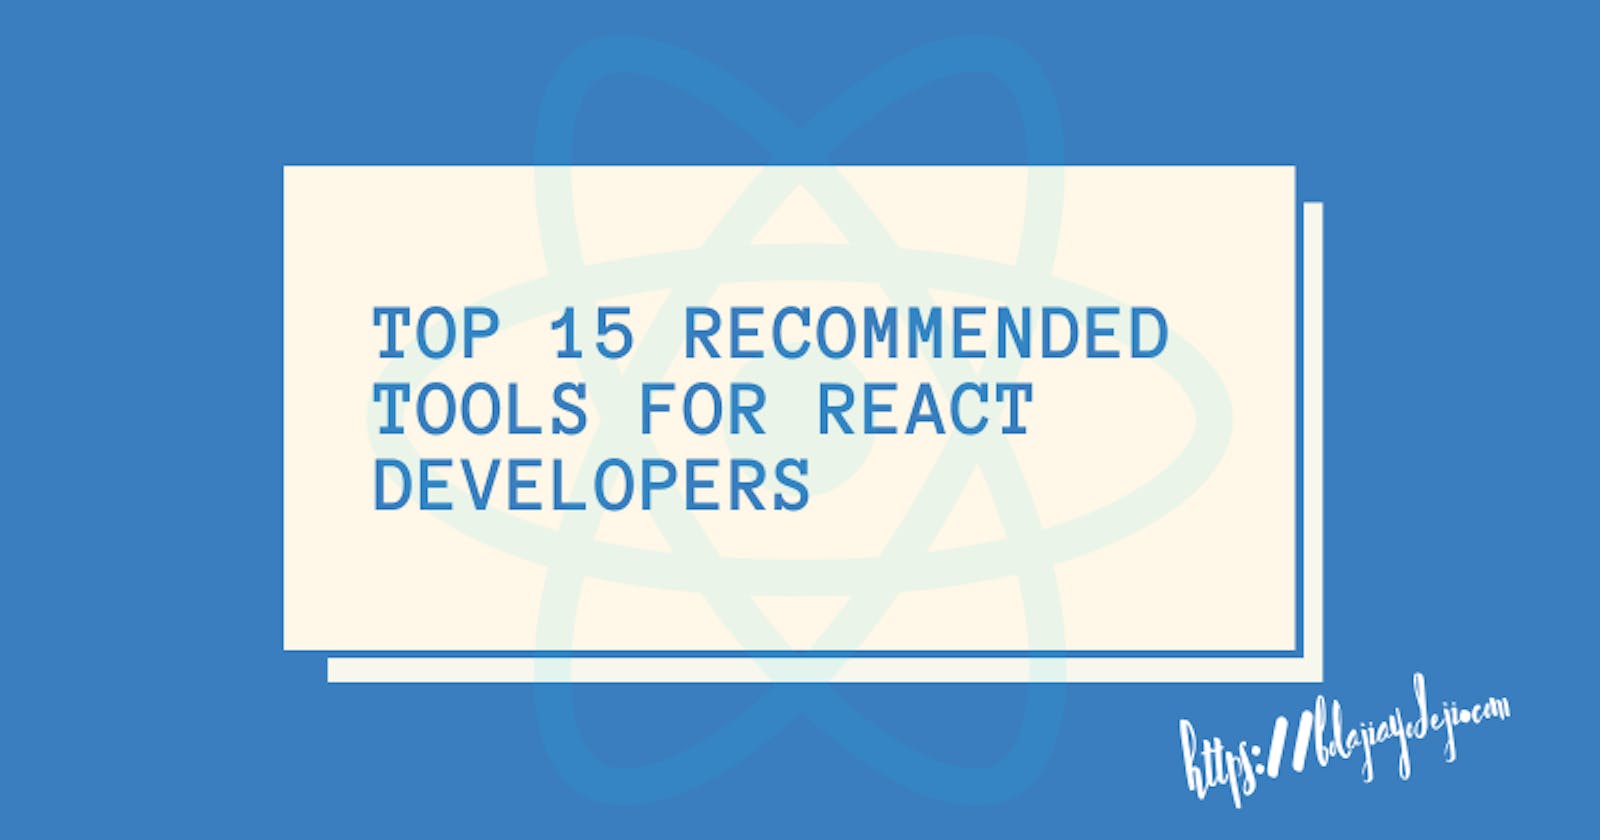 Top 15 Recommended Tools for React Developers